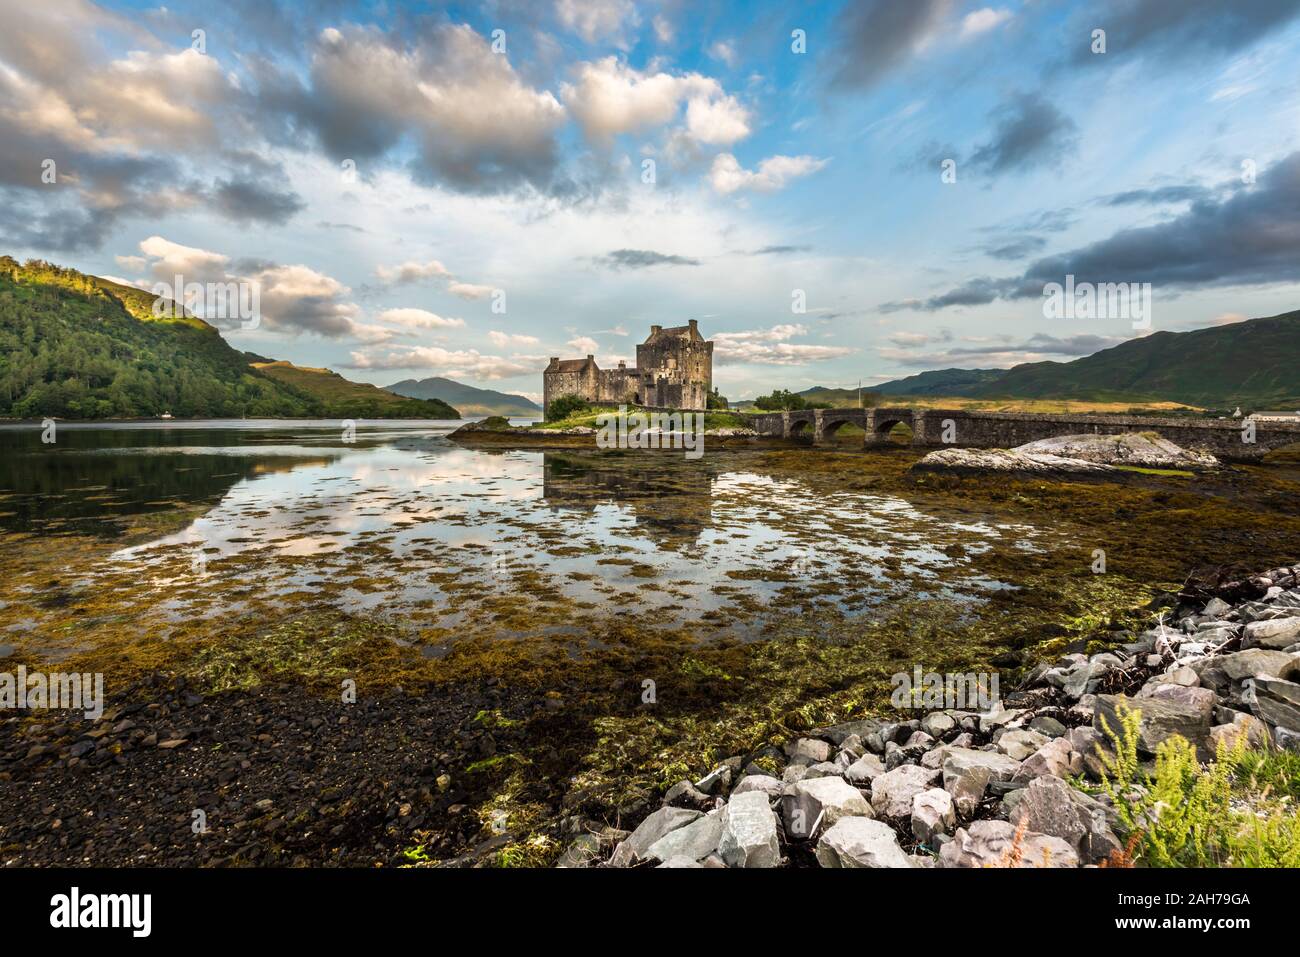 Ancient scottish castle sitting on a rock among seaweeds under a blue sky with puffy clouds in the early morning light Stock Photo